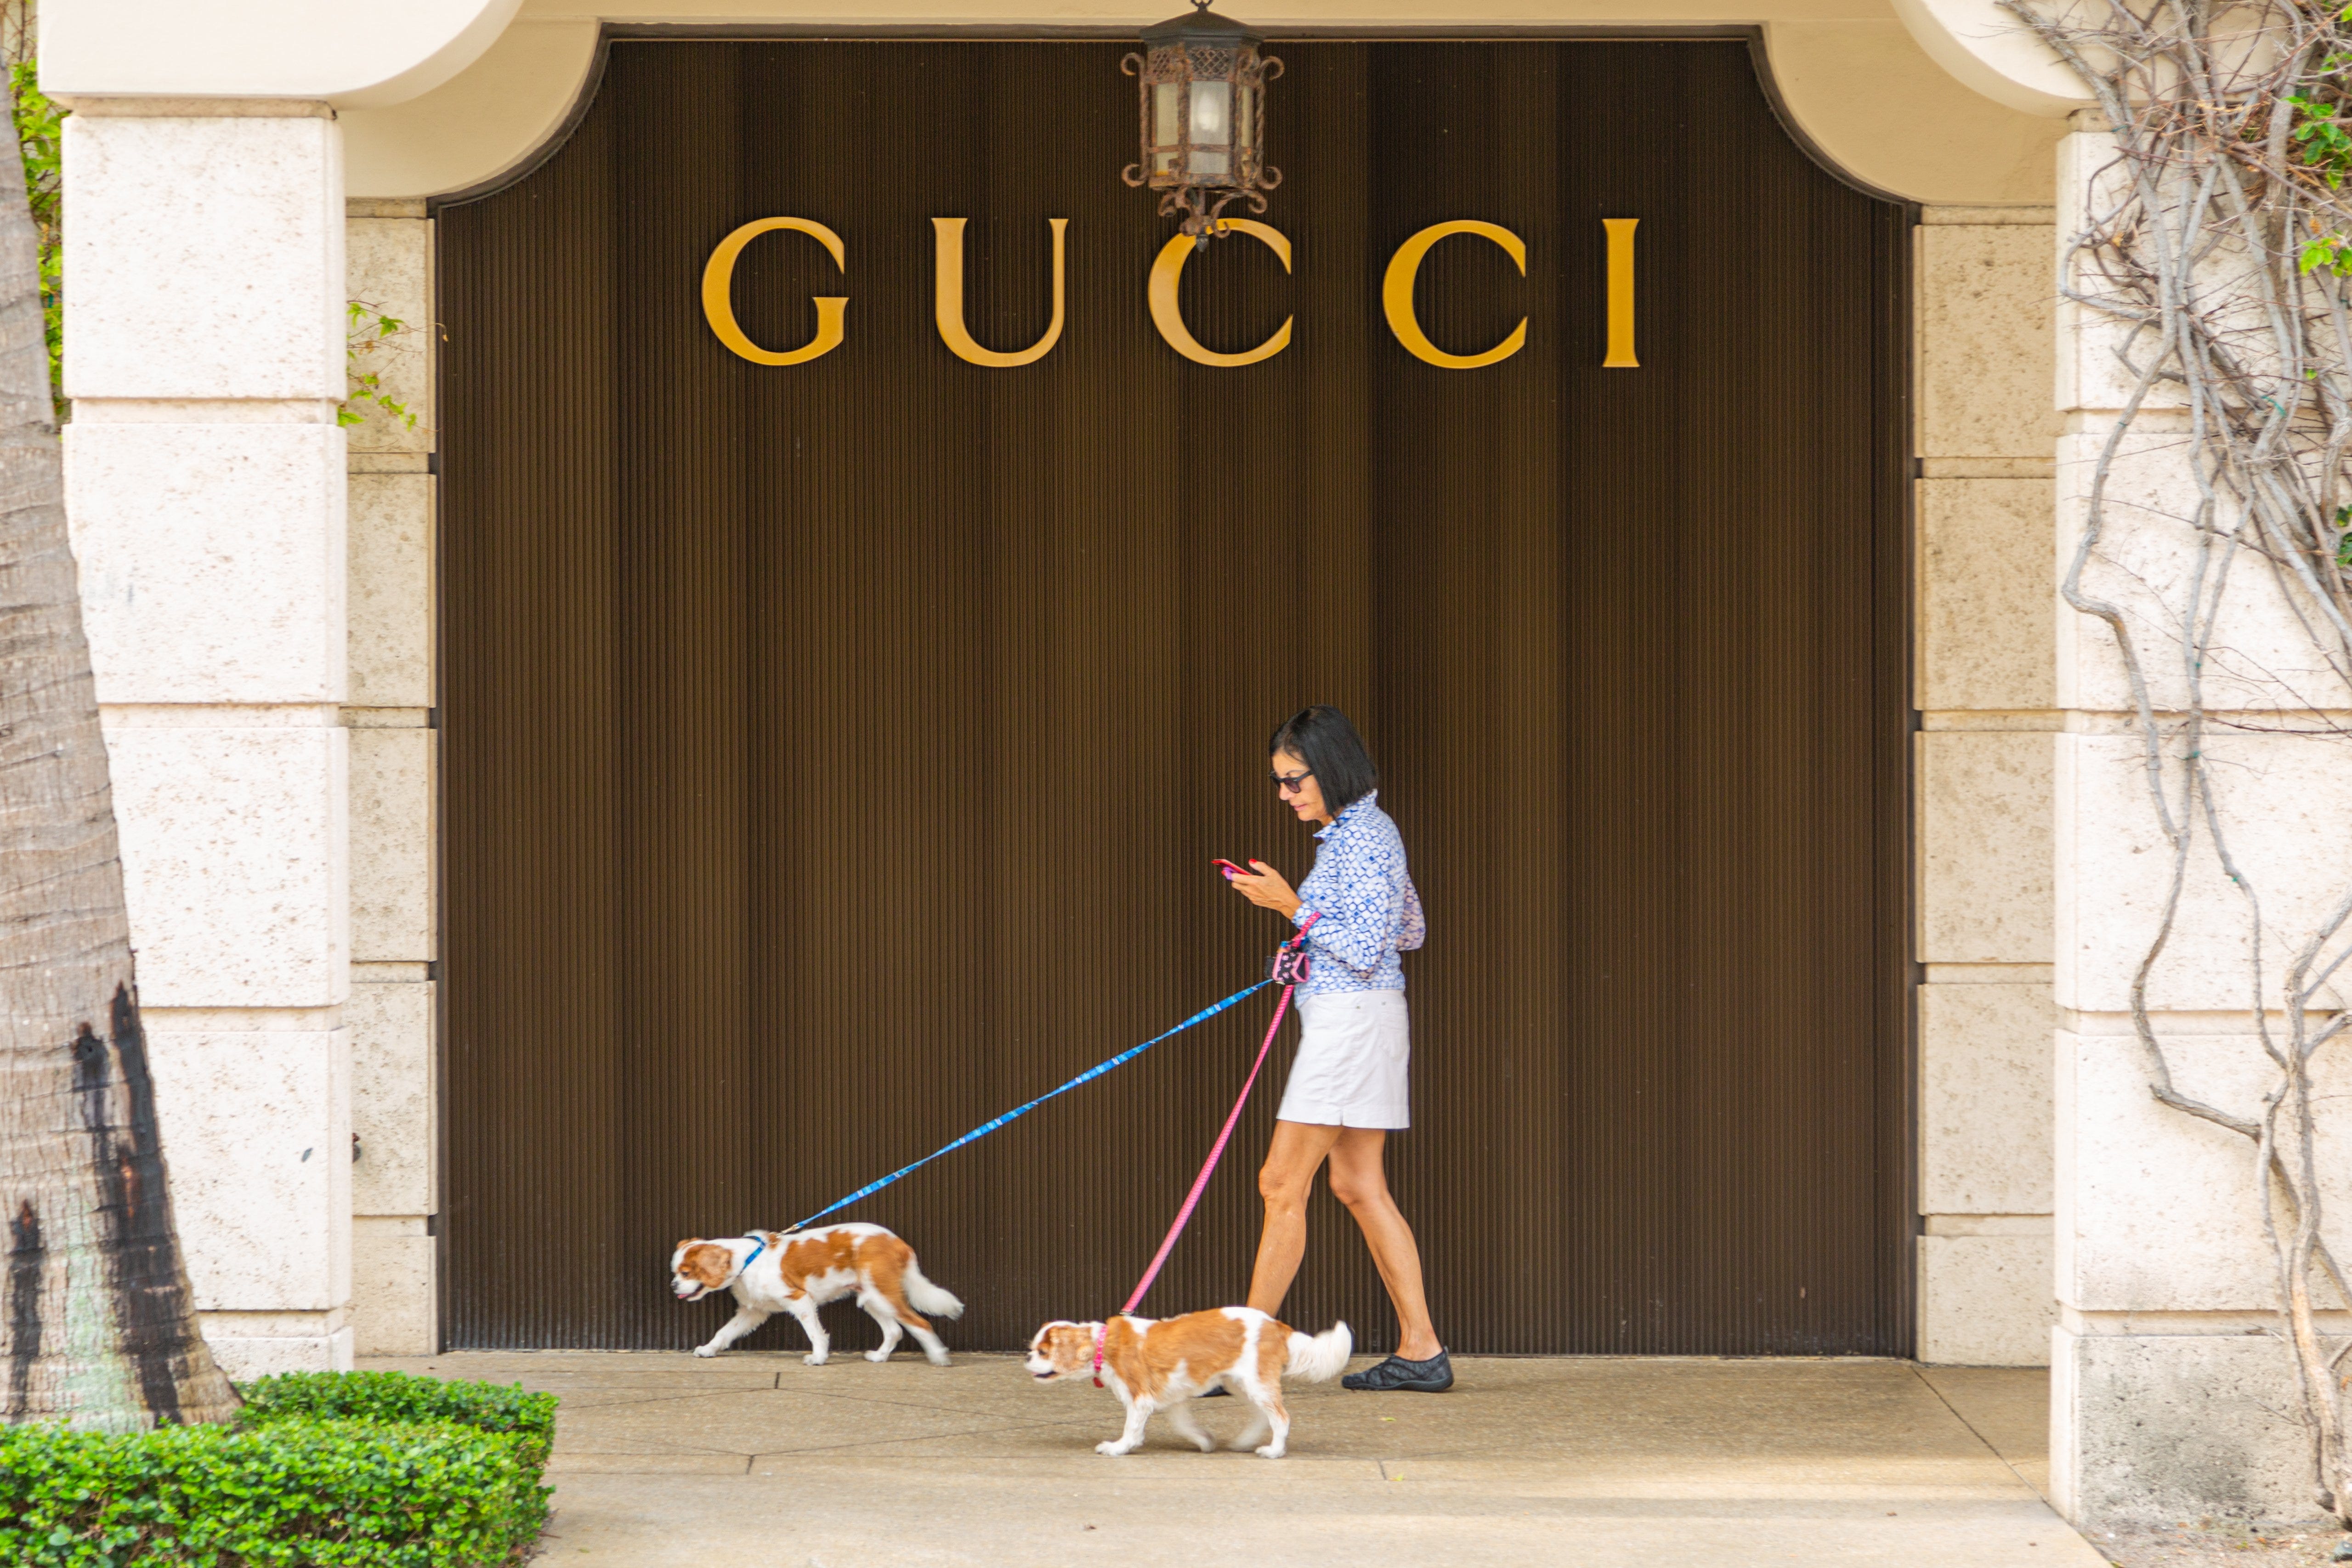 Gucci plans to debut new Palm Beach location in early 2023